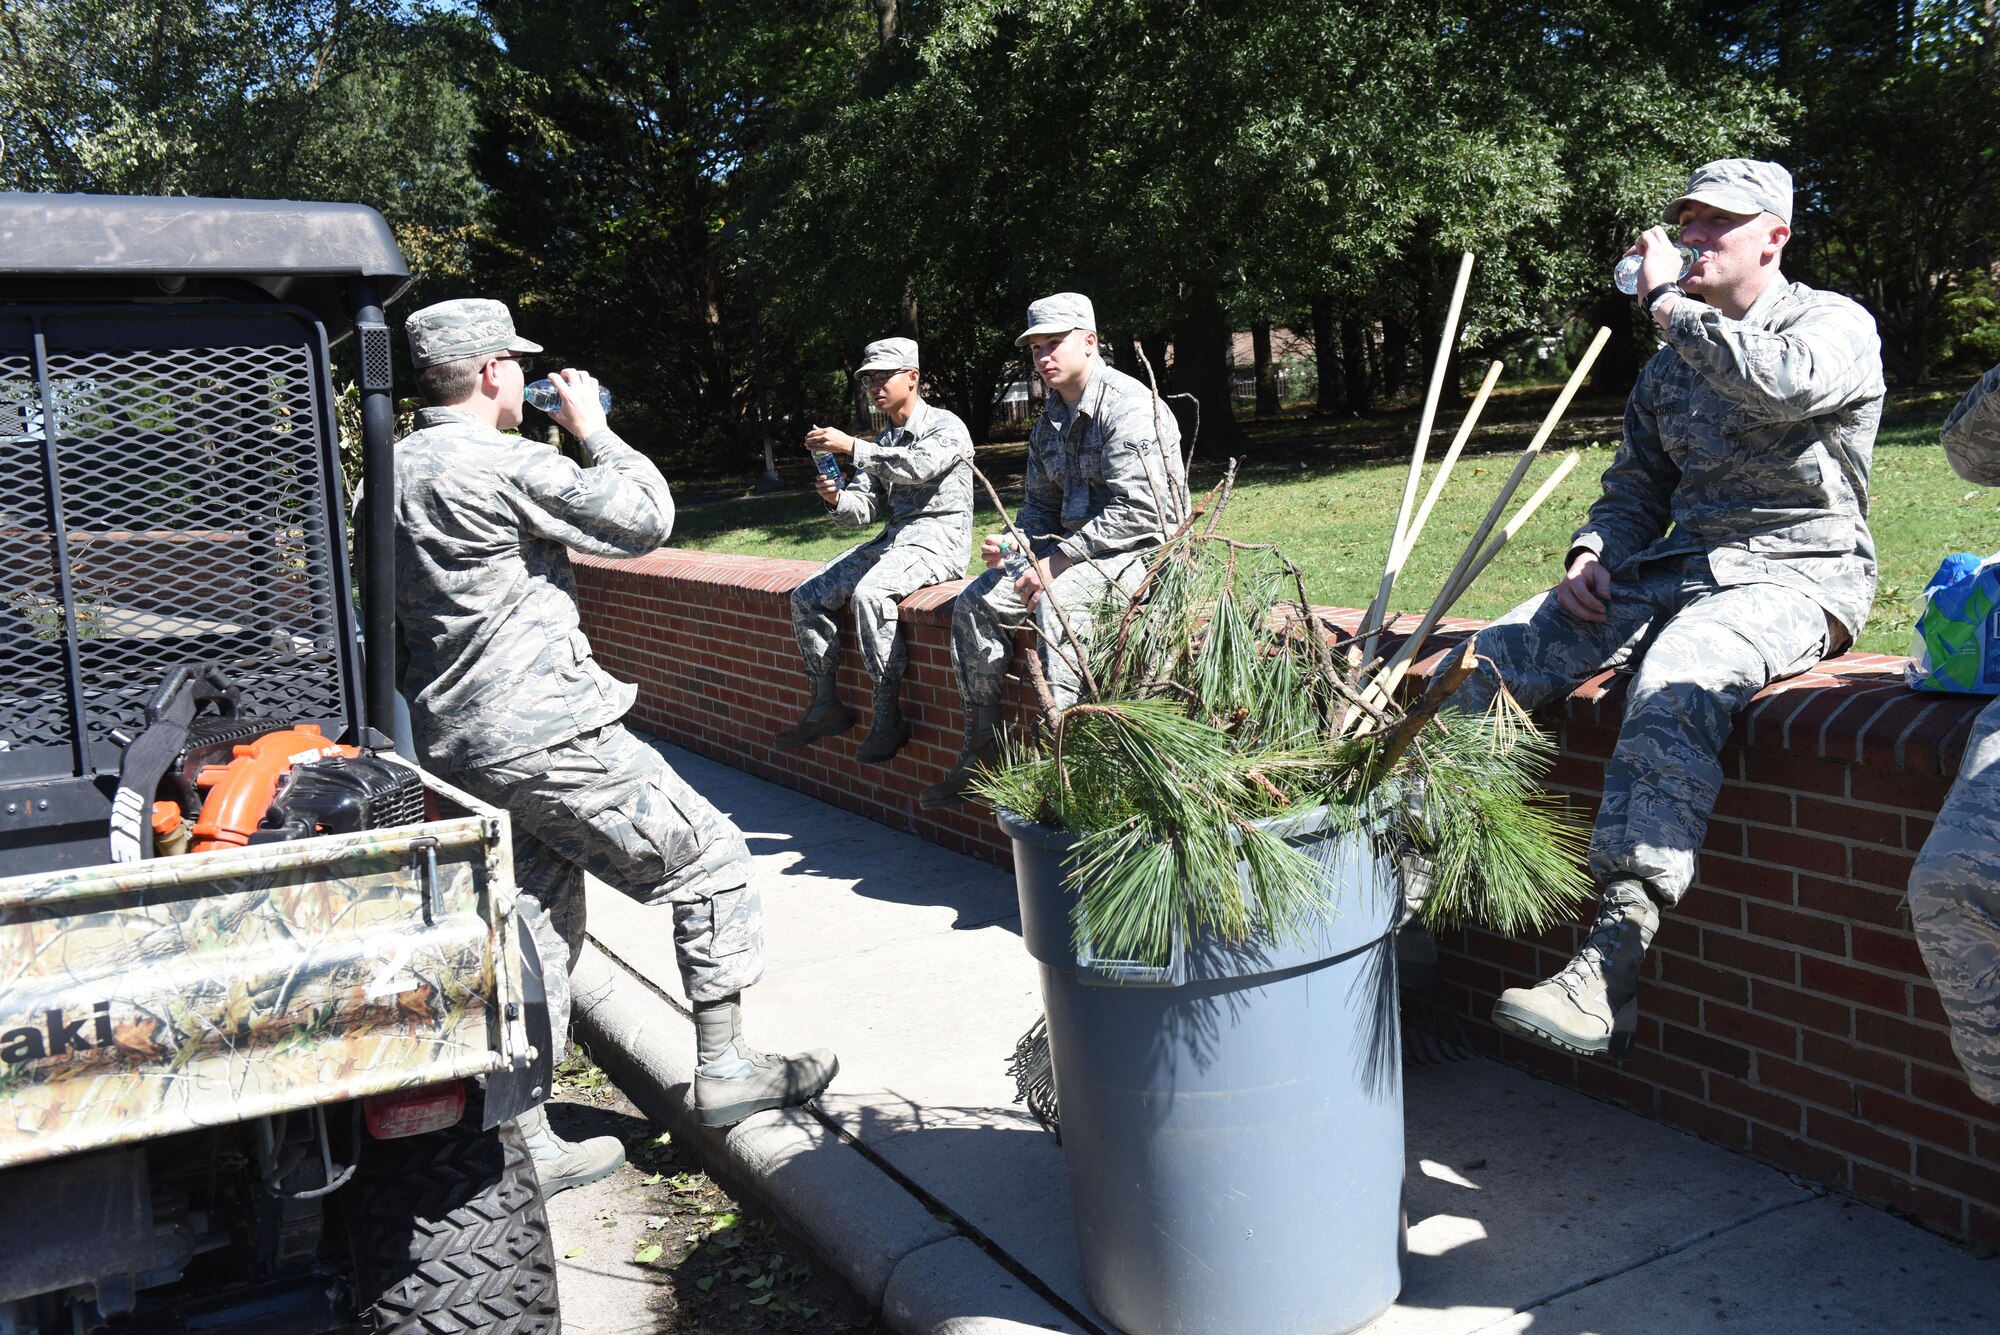 Airmen assigned to the Pride Team Program take a break from picking up branches around the base from the aftermath of Hurricane Matthew, Oct. 9, 2016, at Seymour Johnson Air Force Base, North Carolina. Many areas around base and Goldsboro, North Carolina were flooded and have fallen trees and power outages as a result of the storm, but Team Seymour members continue to complete the mission. (U.S. Air Force photo by Airman 1st Class Ashley Williamson)